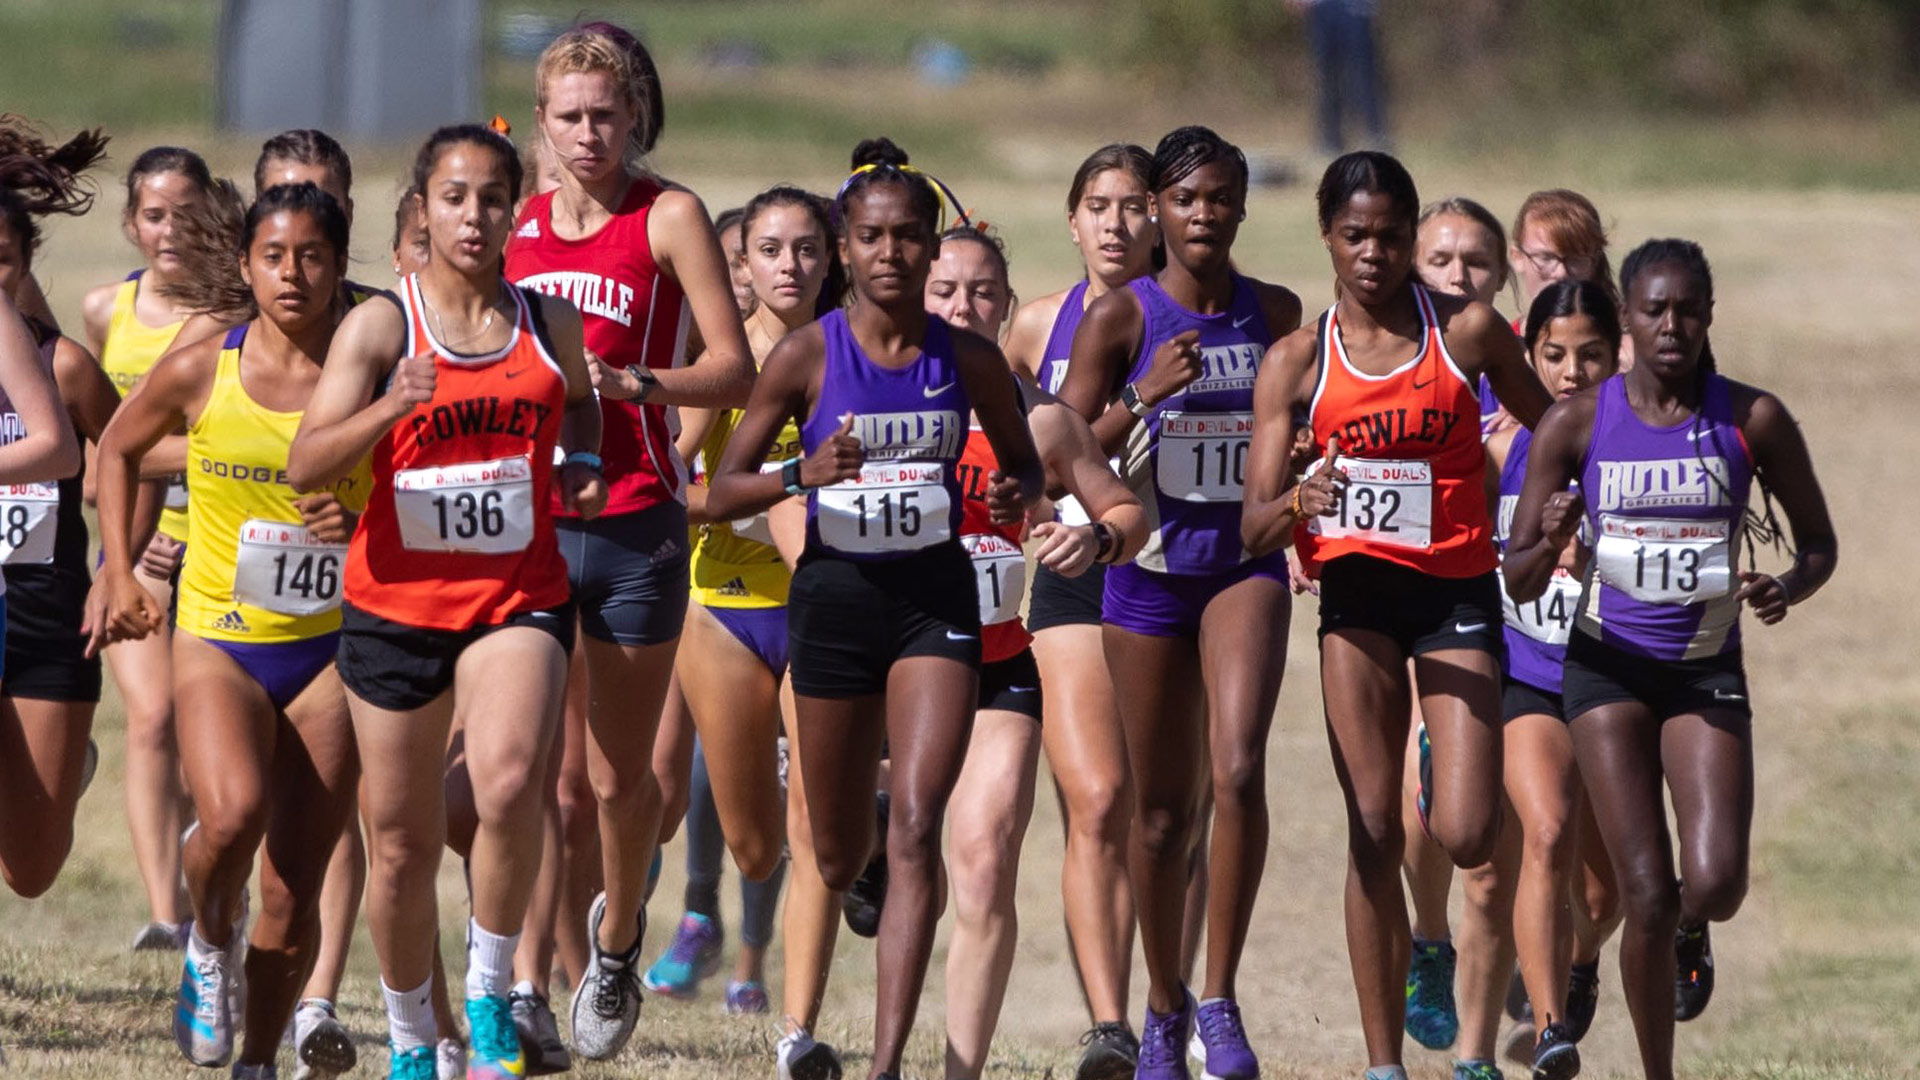 Suied wins another race, Lady Tigers place third